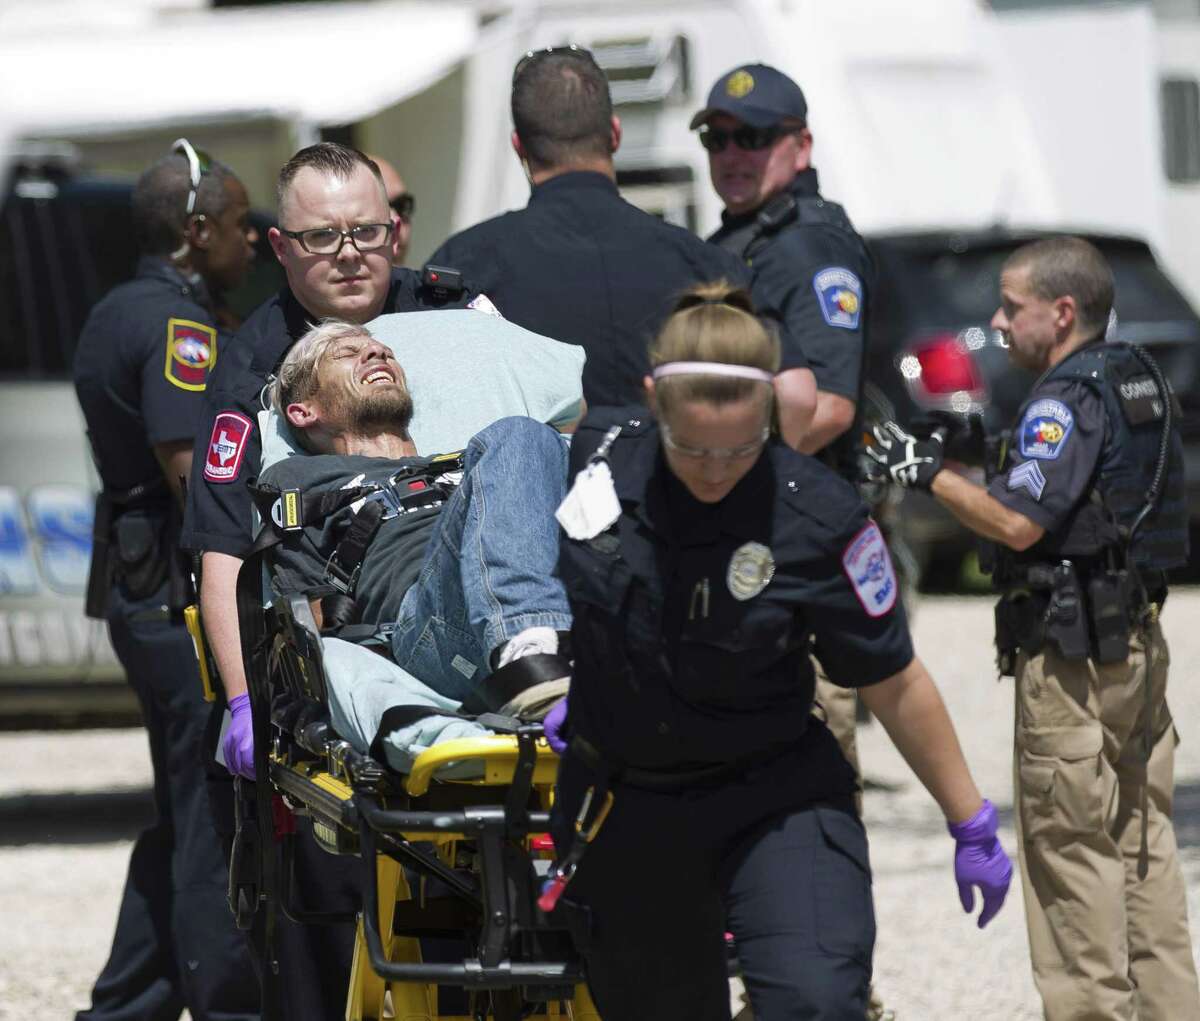 The suspect, Forest Hugh Olive, is transported by Montgomery County Hospital District paramedics at the scene where a car chase ended and two suspects were held at gunpoint by law enforcement at Omega Farms RV Park outside of Willis city limits on Wednesday, Aug. 15, 2018, in Conroe. The second suspect was later released with no charges filed against him.